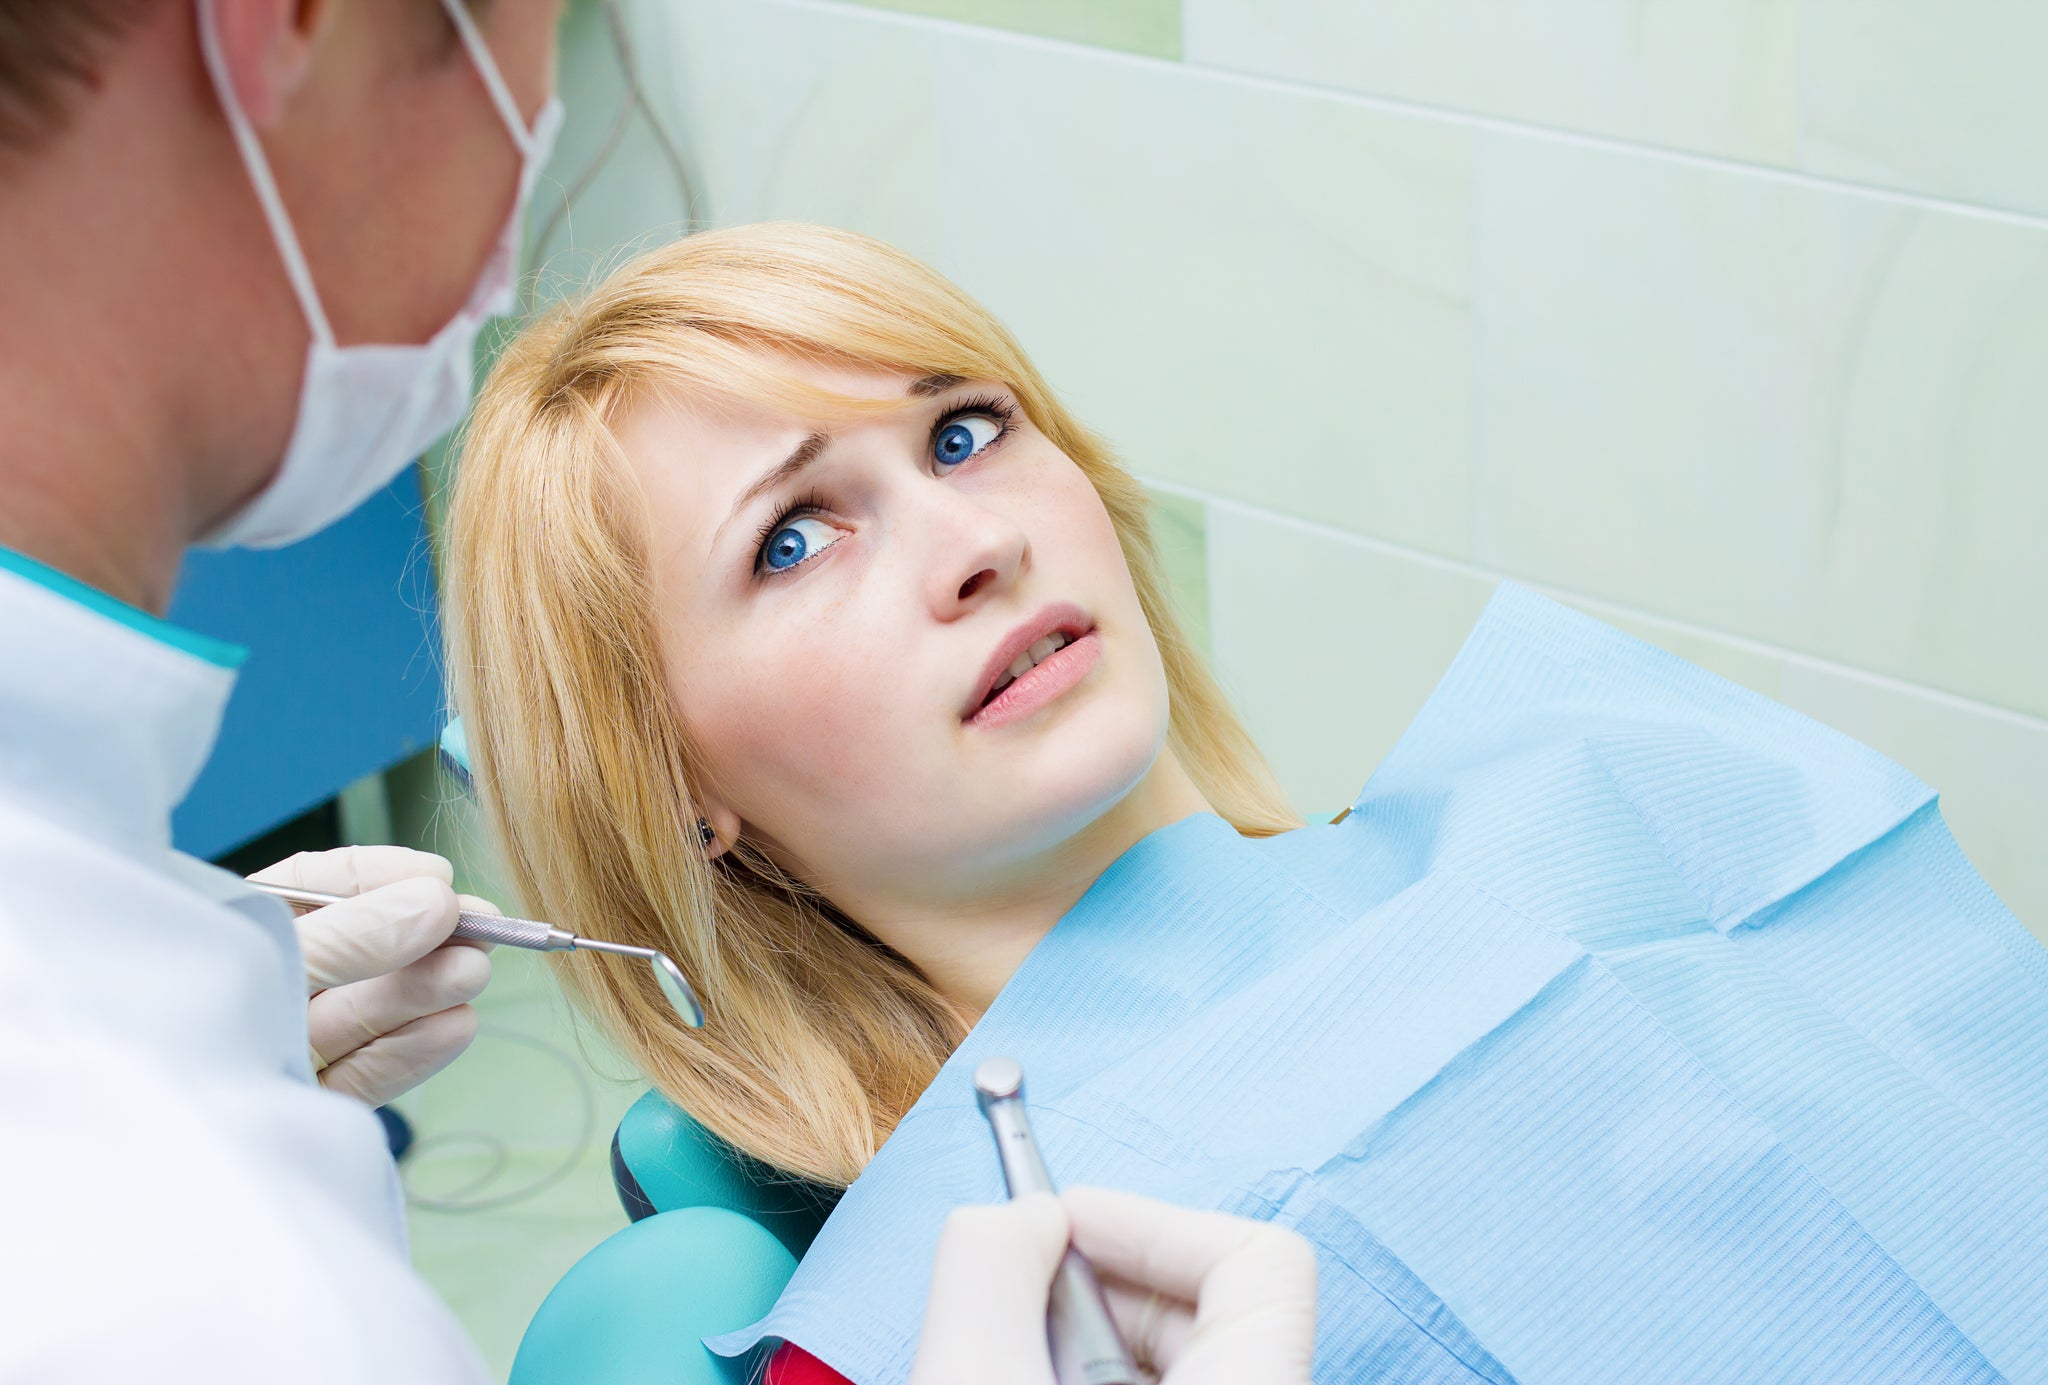 Closeup portrait young terrified girl woman scared at dentist visit, siting in chair looking at doctor doesn't want dental procedure, drilling, tooth extraction, isolated clinic office background